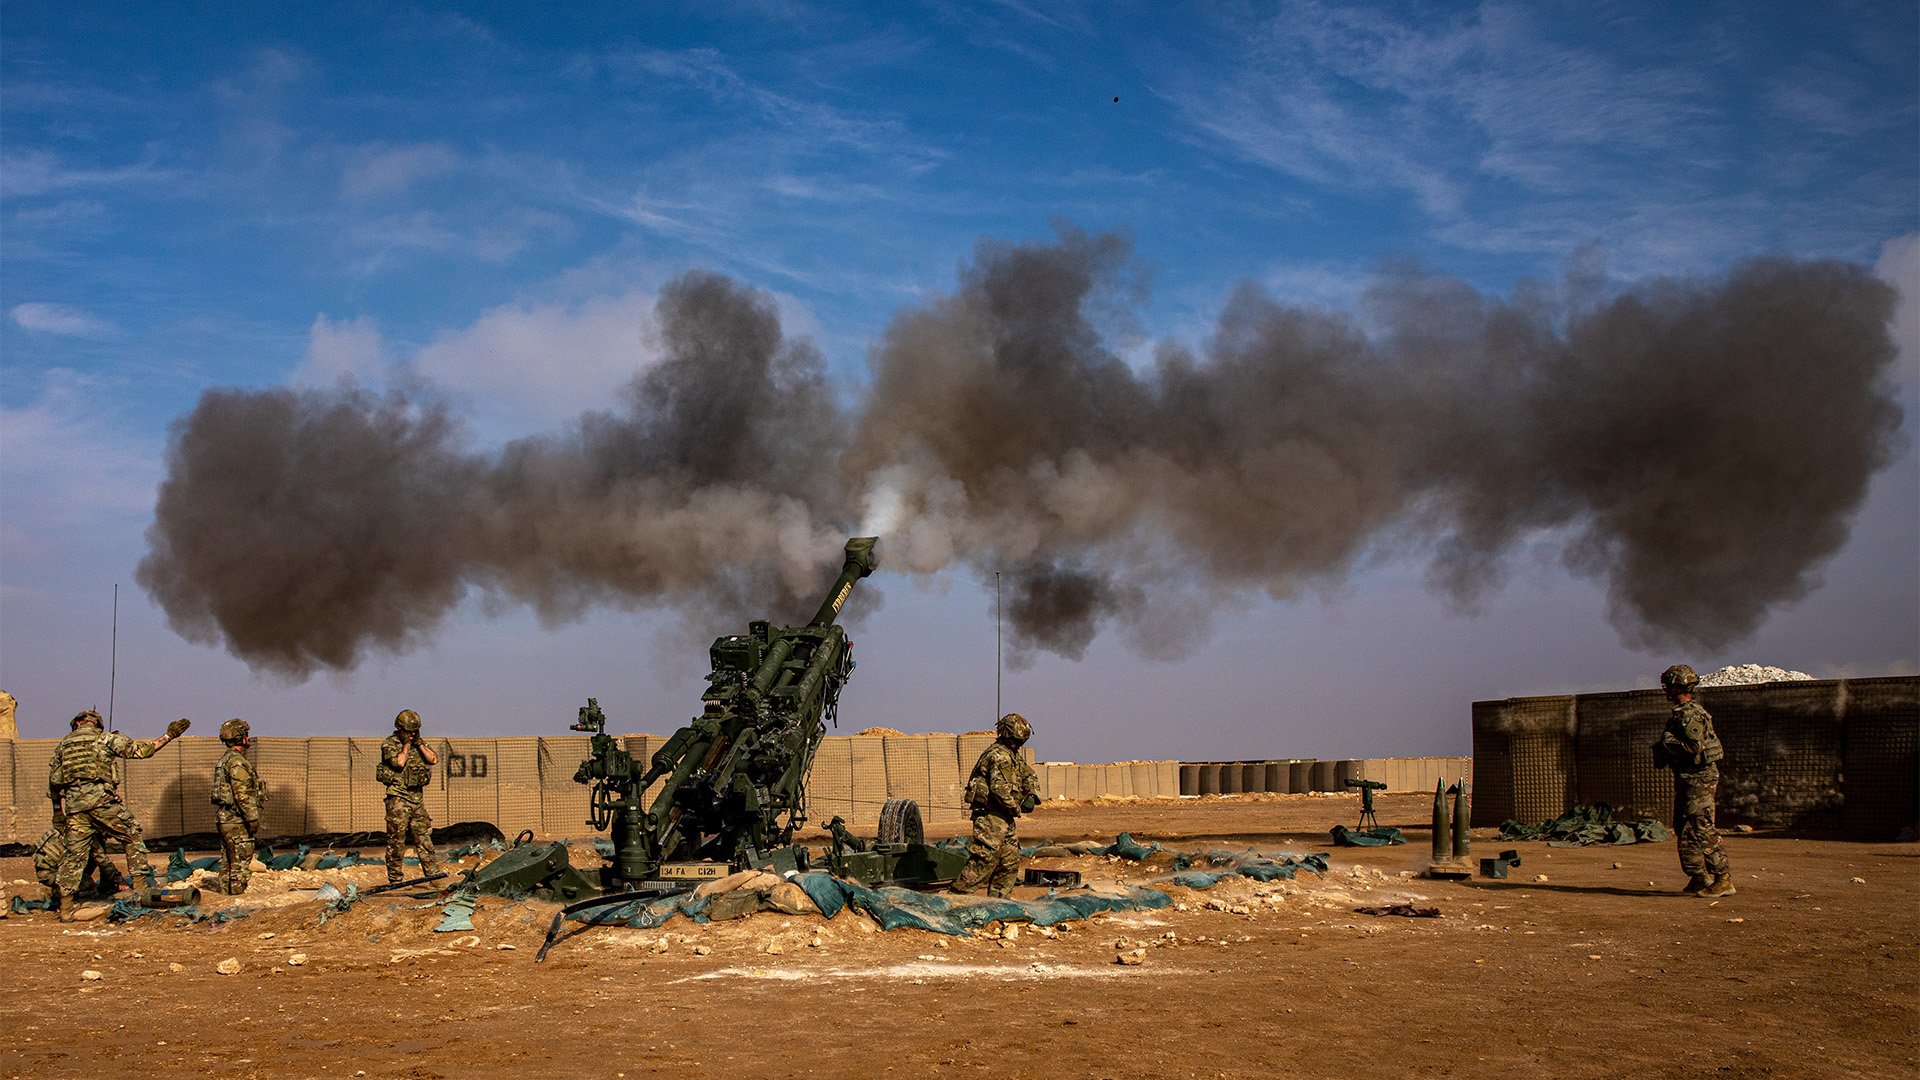 Military officials have declined to say whether US forces, including Charlie Battery, 1st Battalion, 134th Field Artillery Regiment, 37th Infantry Brigade Combat Team, Ohio Army National Guard, conducted counter-fire on militiamen who attacked Mission Support Site Conoco in northeastern Syria on Jan. 4, 2023. Here, Charlie Battery fires an M777 howitzer on Dec. 4, 2022. US Army photo by Sgt. Julio Hernandez.